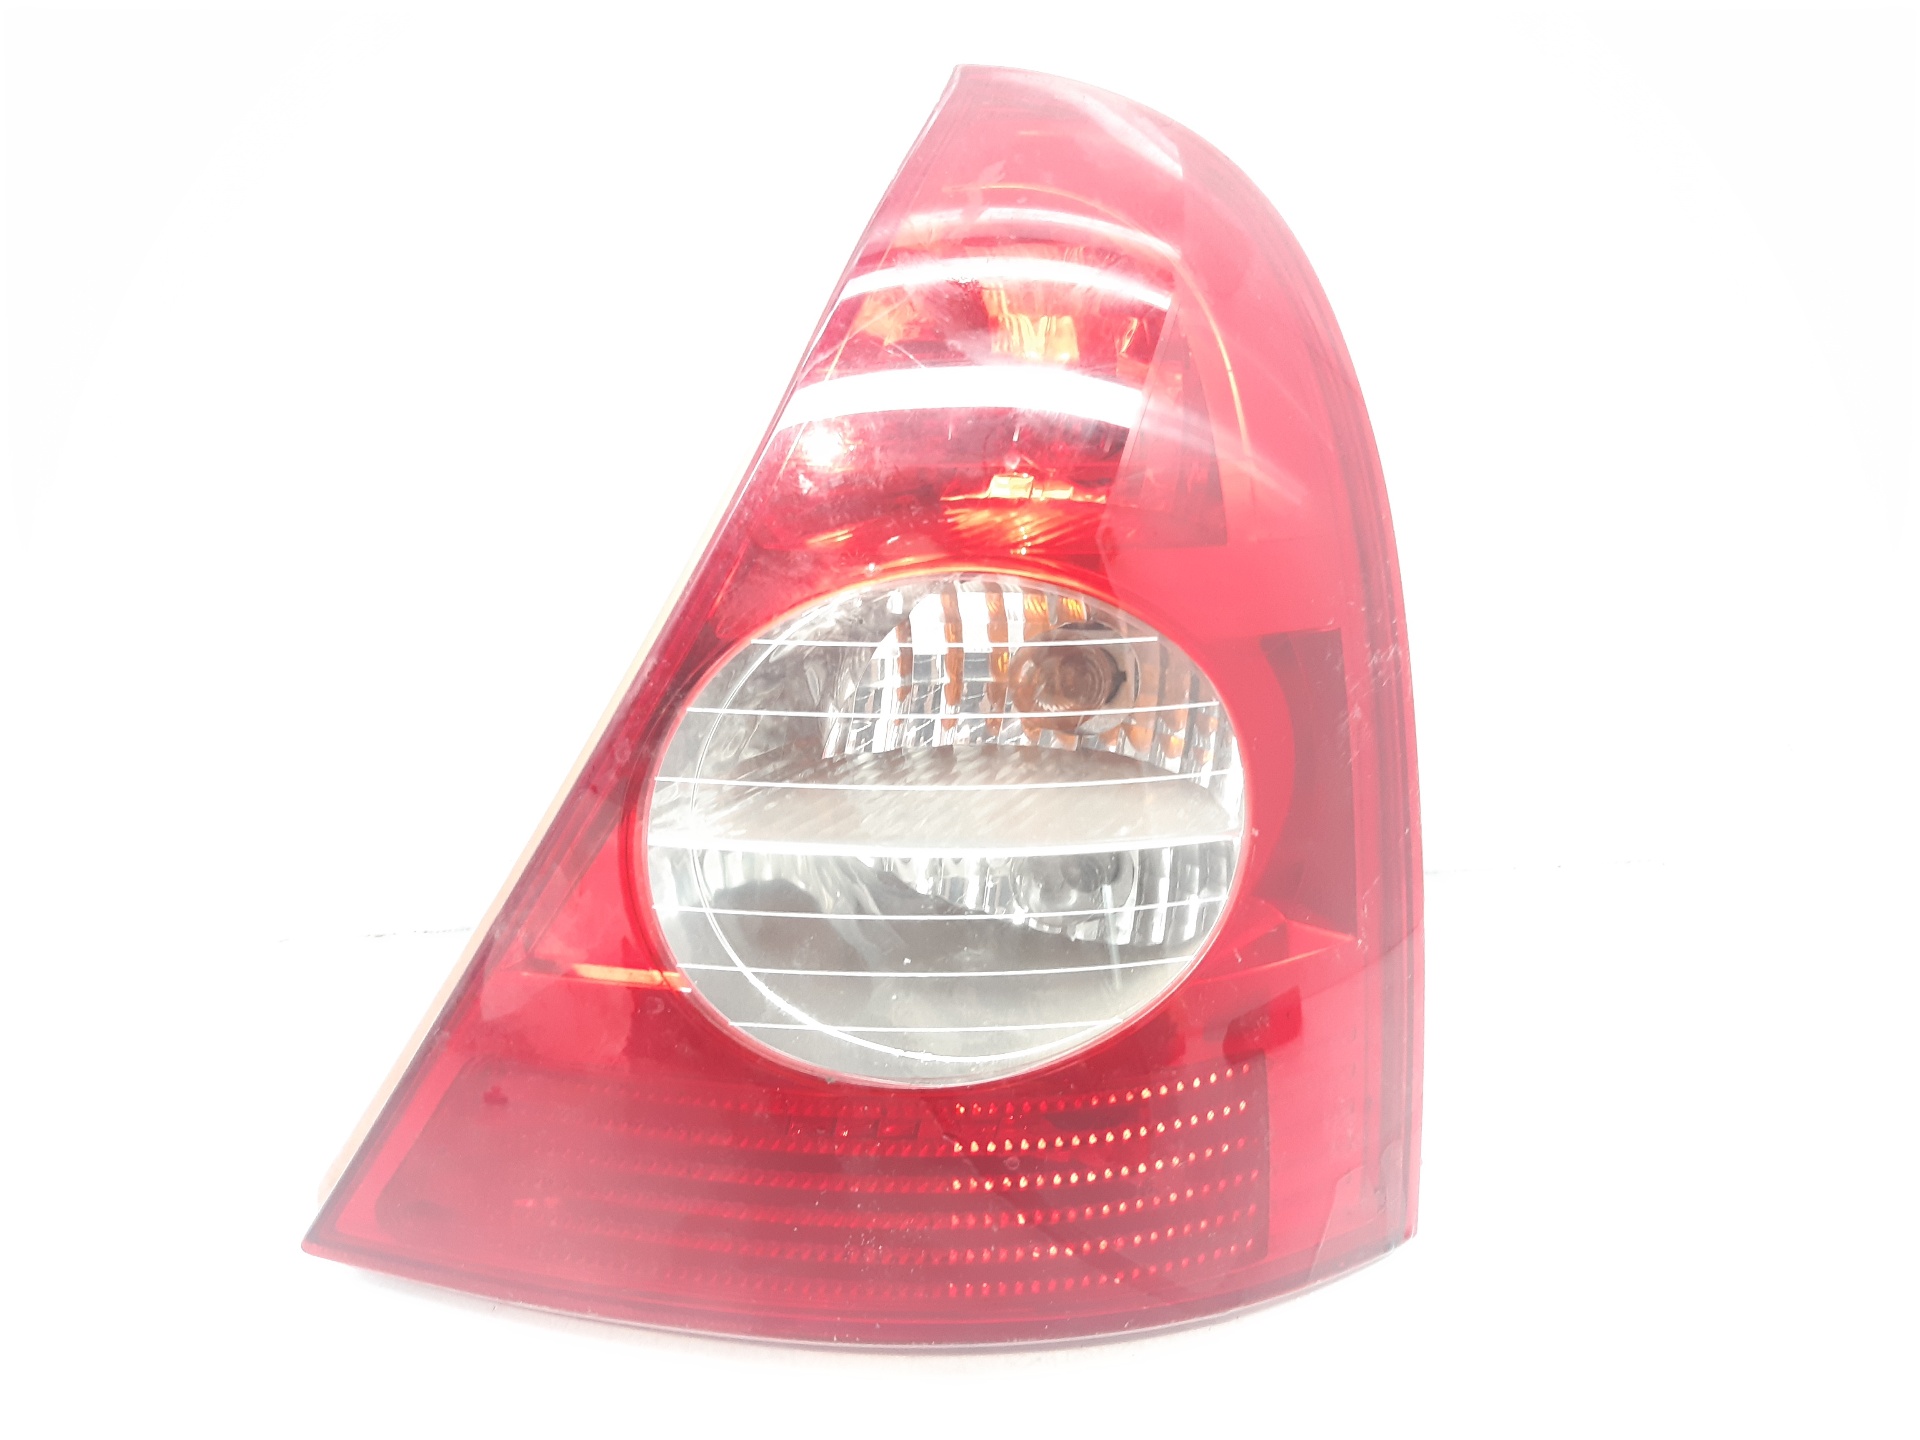 RENAULT Clio 3 generation (2005-2012) Rear Right Taillight Lamp 8200917487 22455448